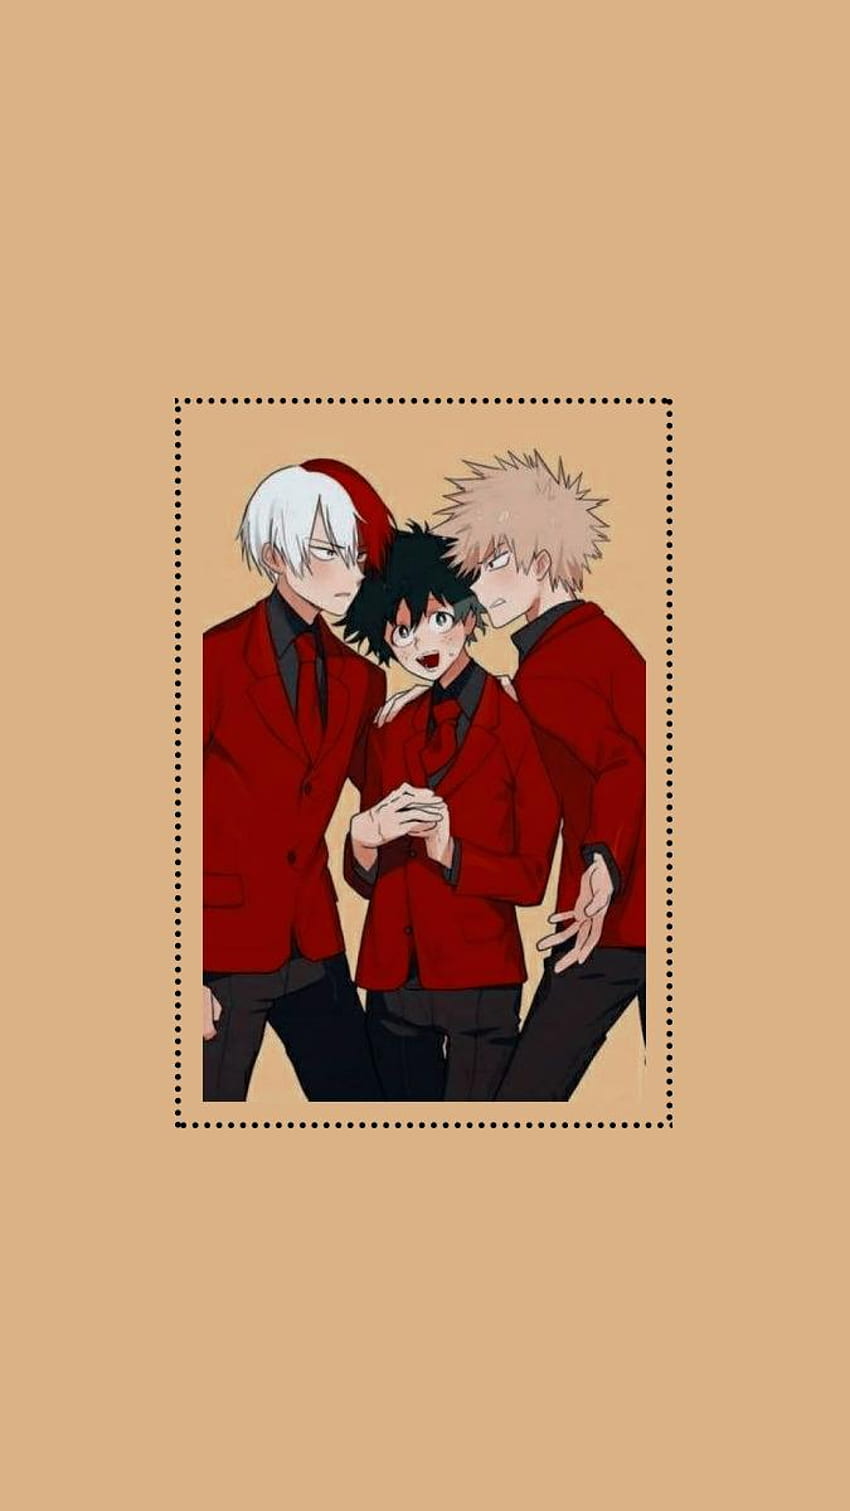 A group of three boys in red suits - My Hero Academia